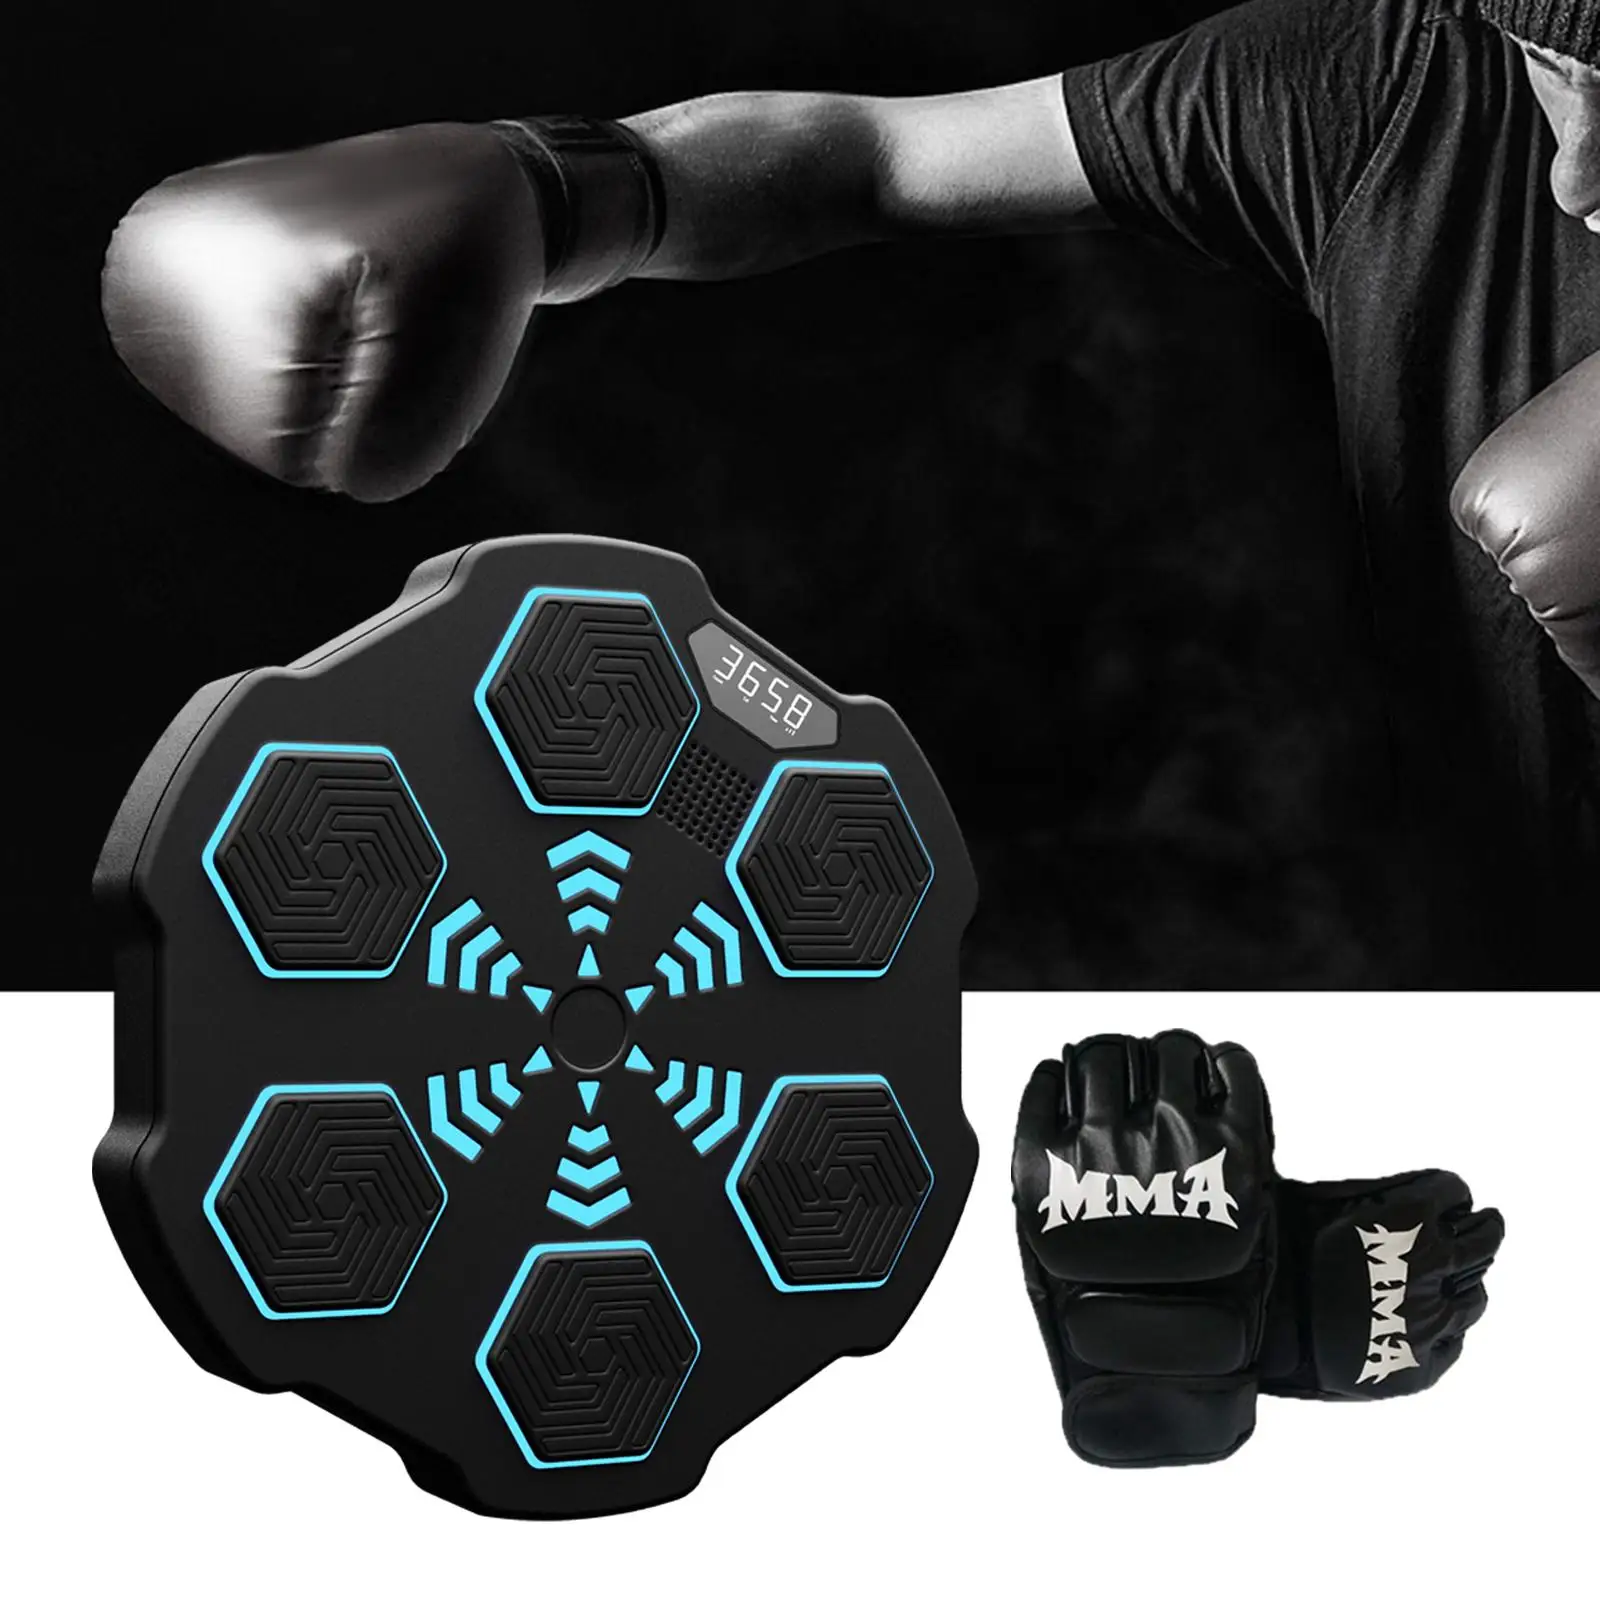 Smart Electronic Wall Target Wall Mounted Music Boxing Machine for Trainer Kids Adults Strength Training Household Practice